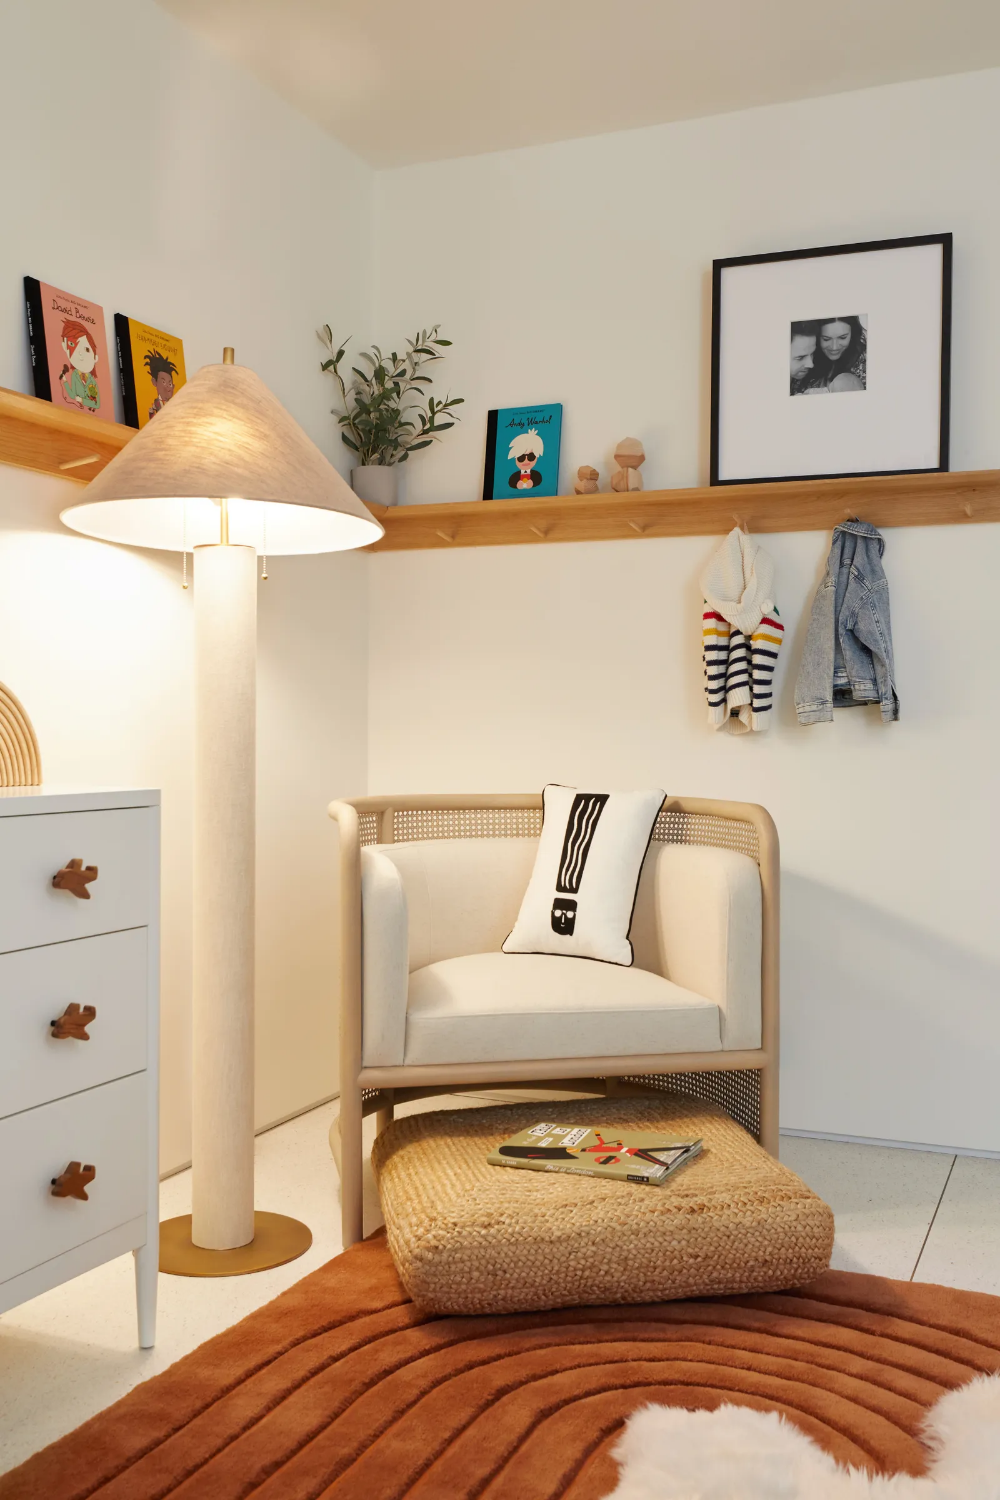 Make your kid happy with naughty and
  inspiring kid room ideas